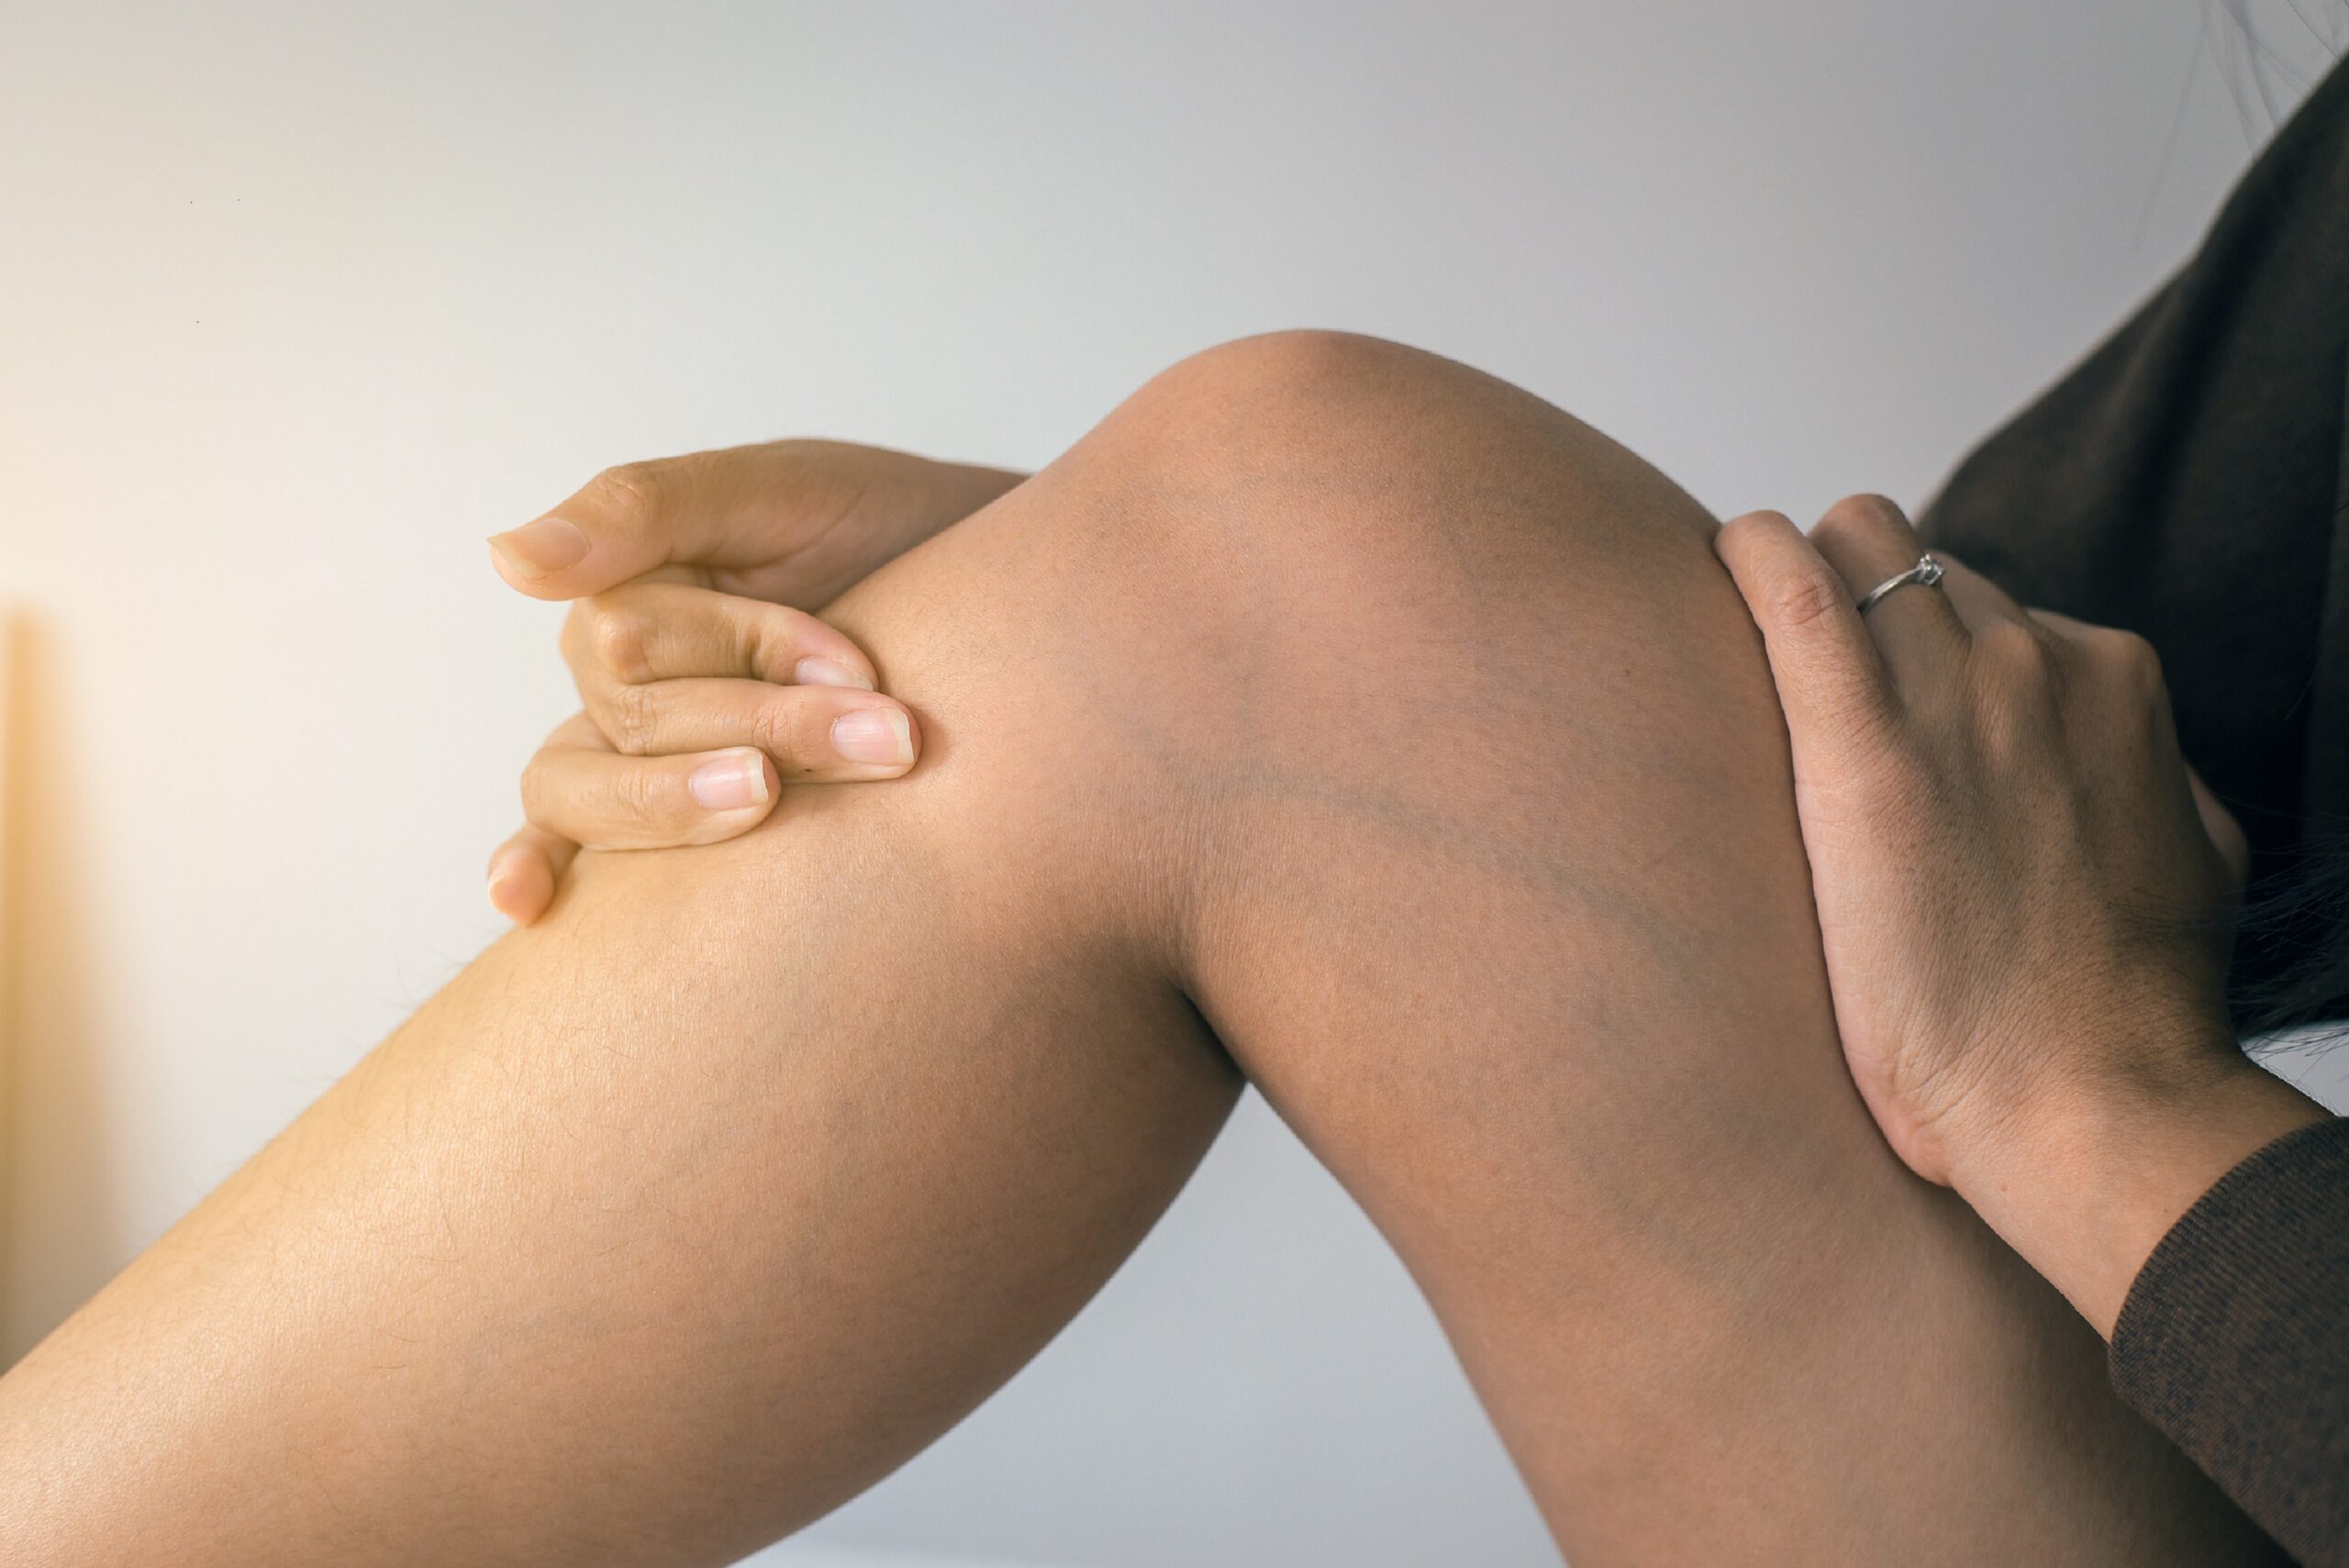 Varicose veins: which home remedies can really help